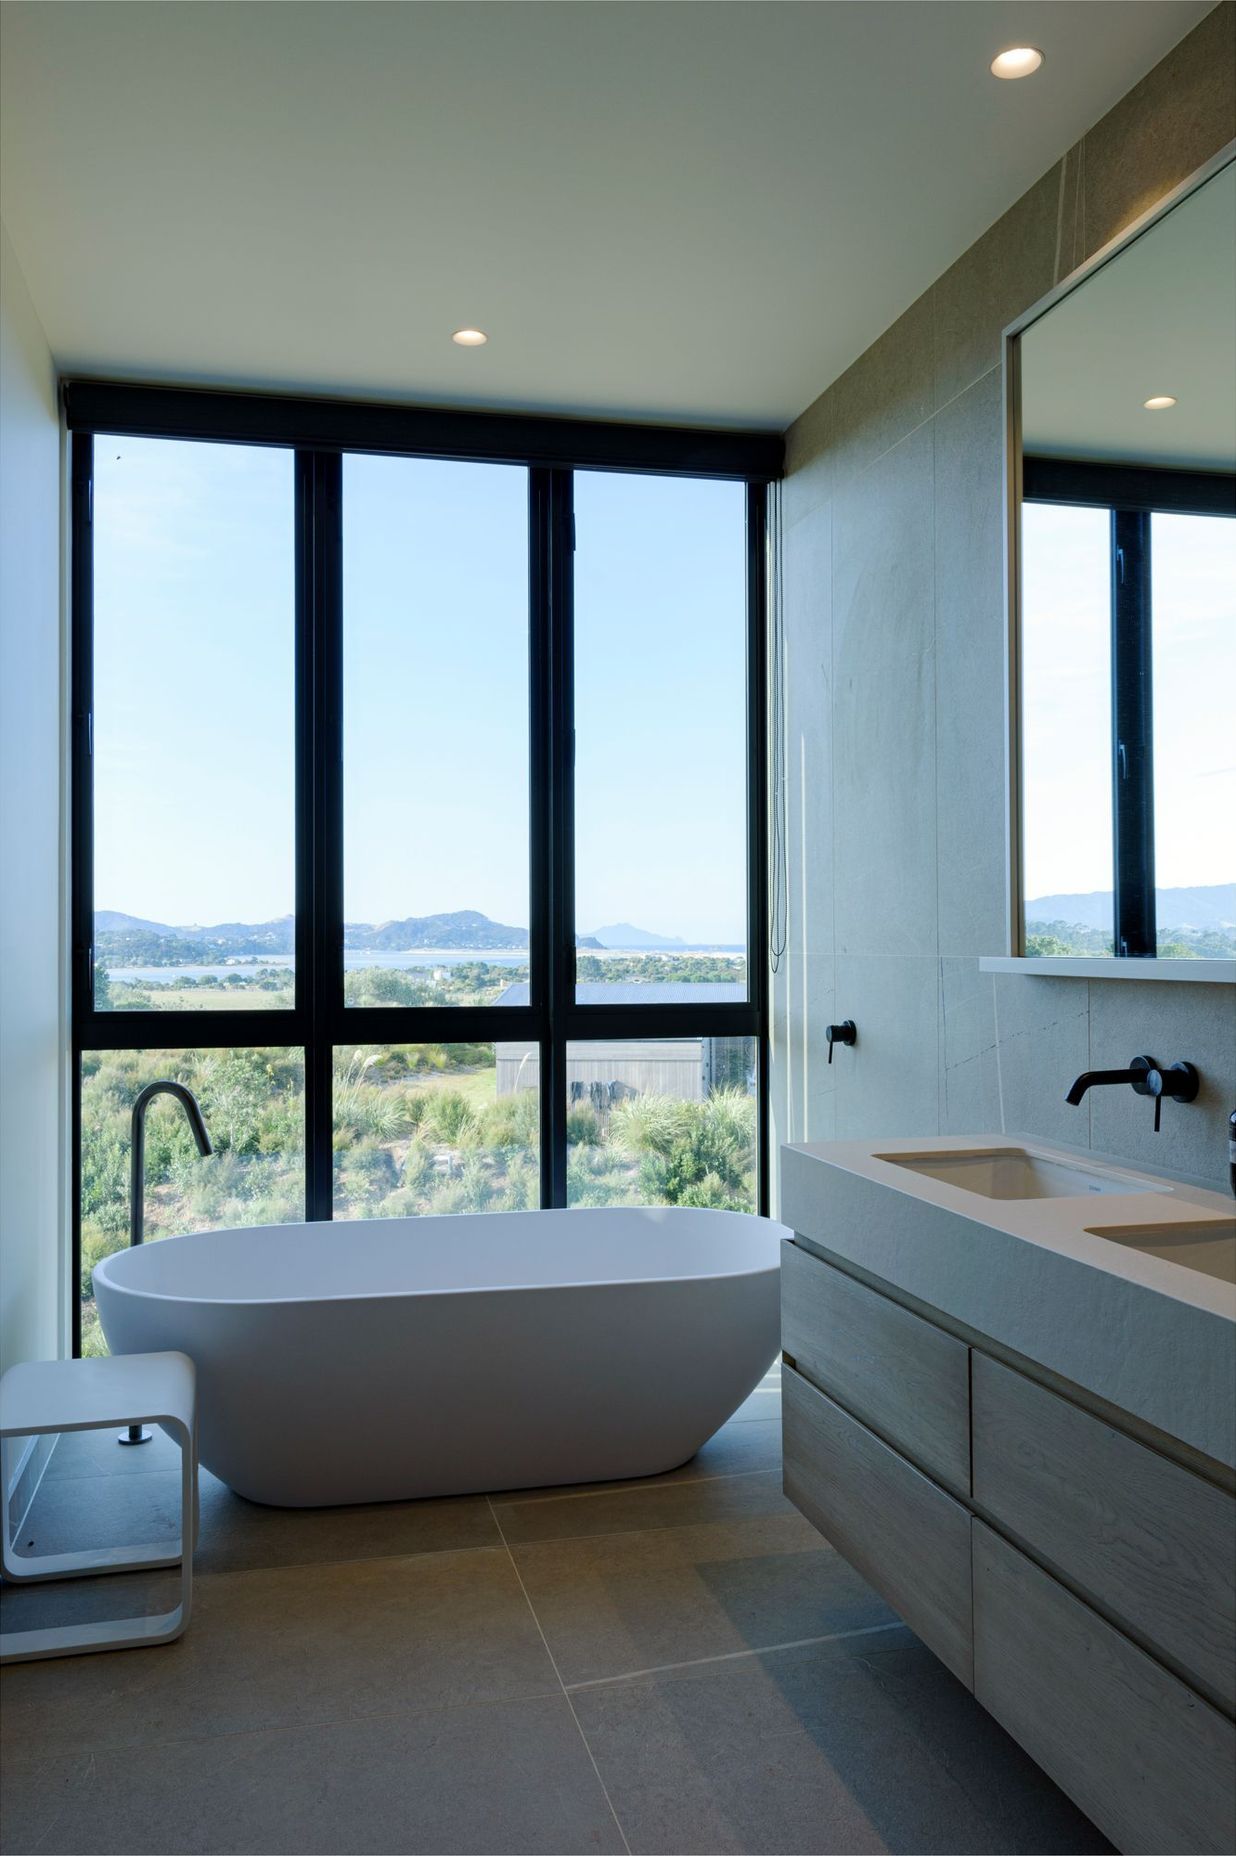 A freestanding bath adjacent to floor-to-ceiling windows makes the most of the expansive views. 